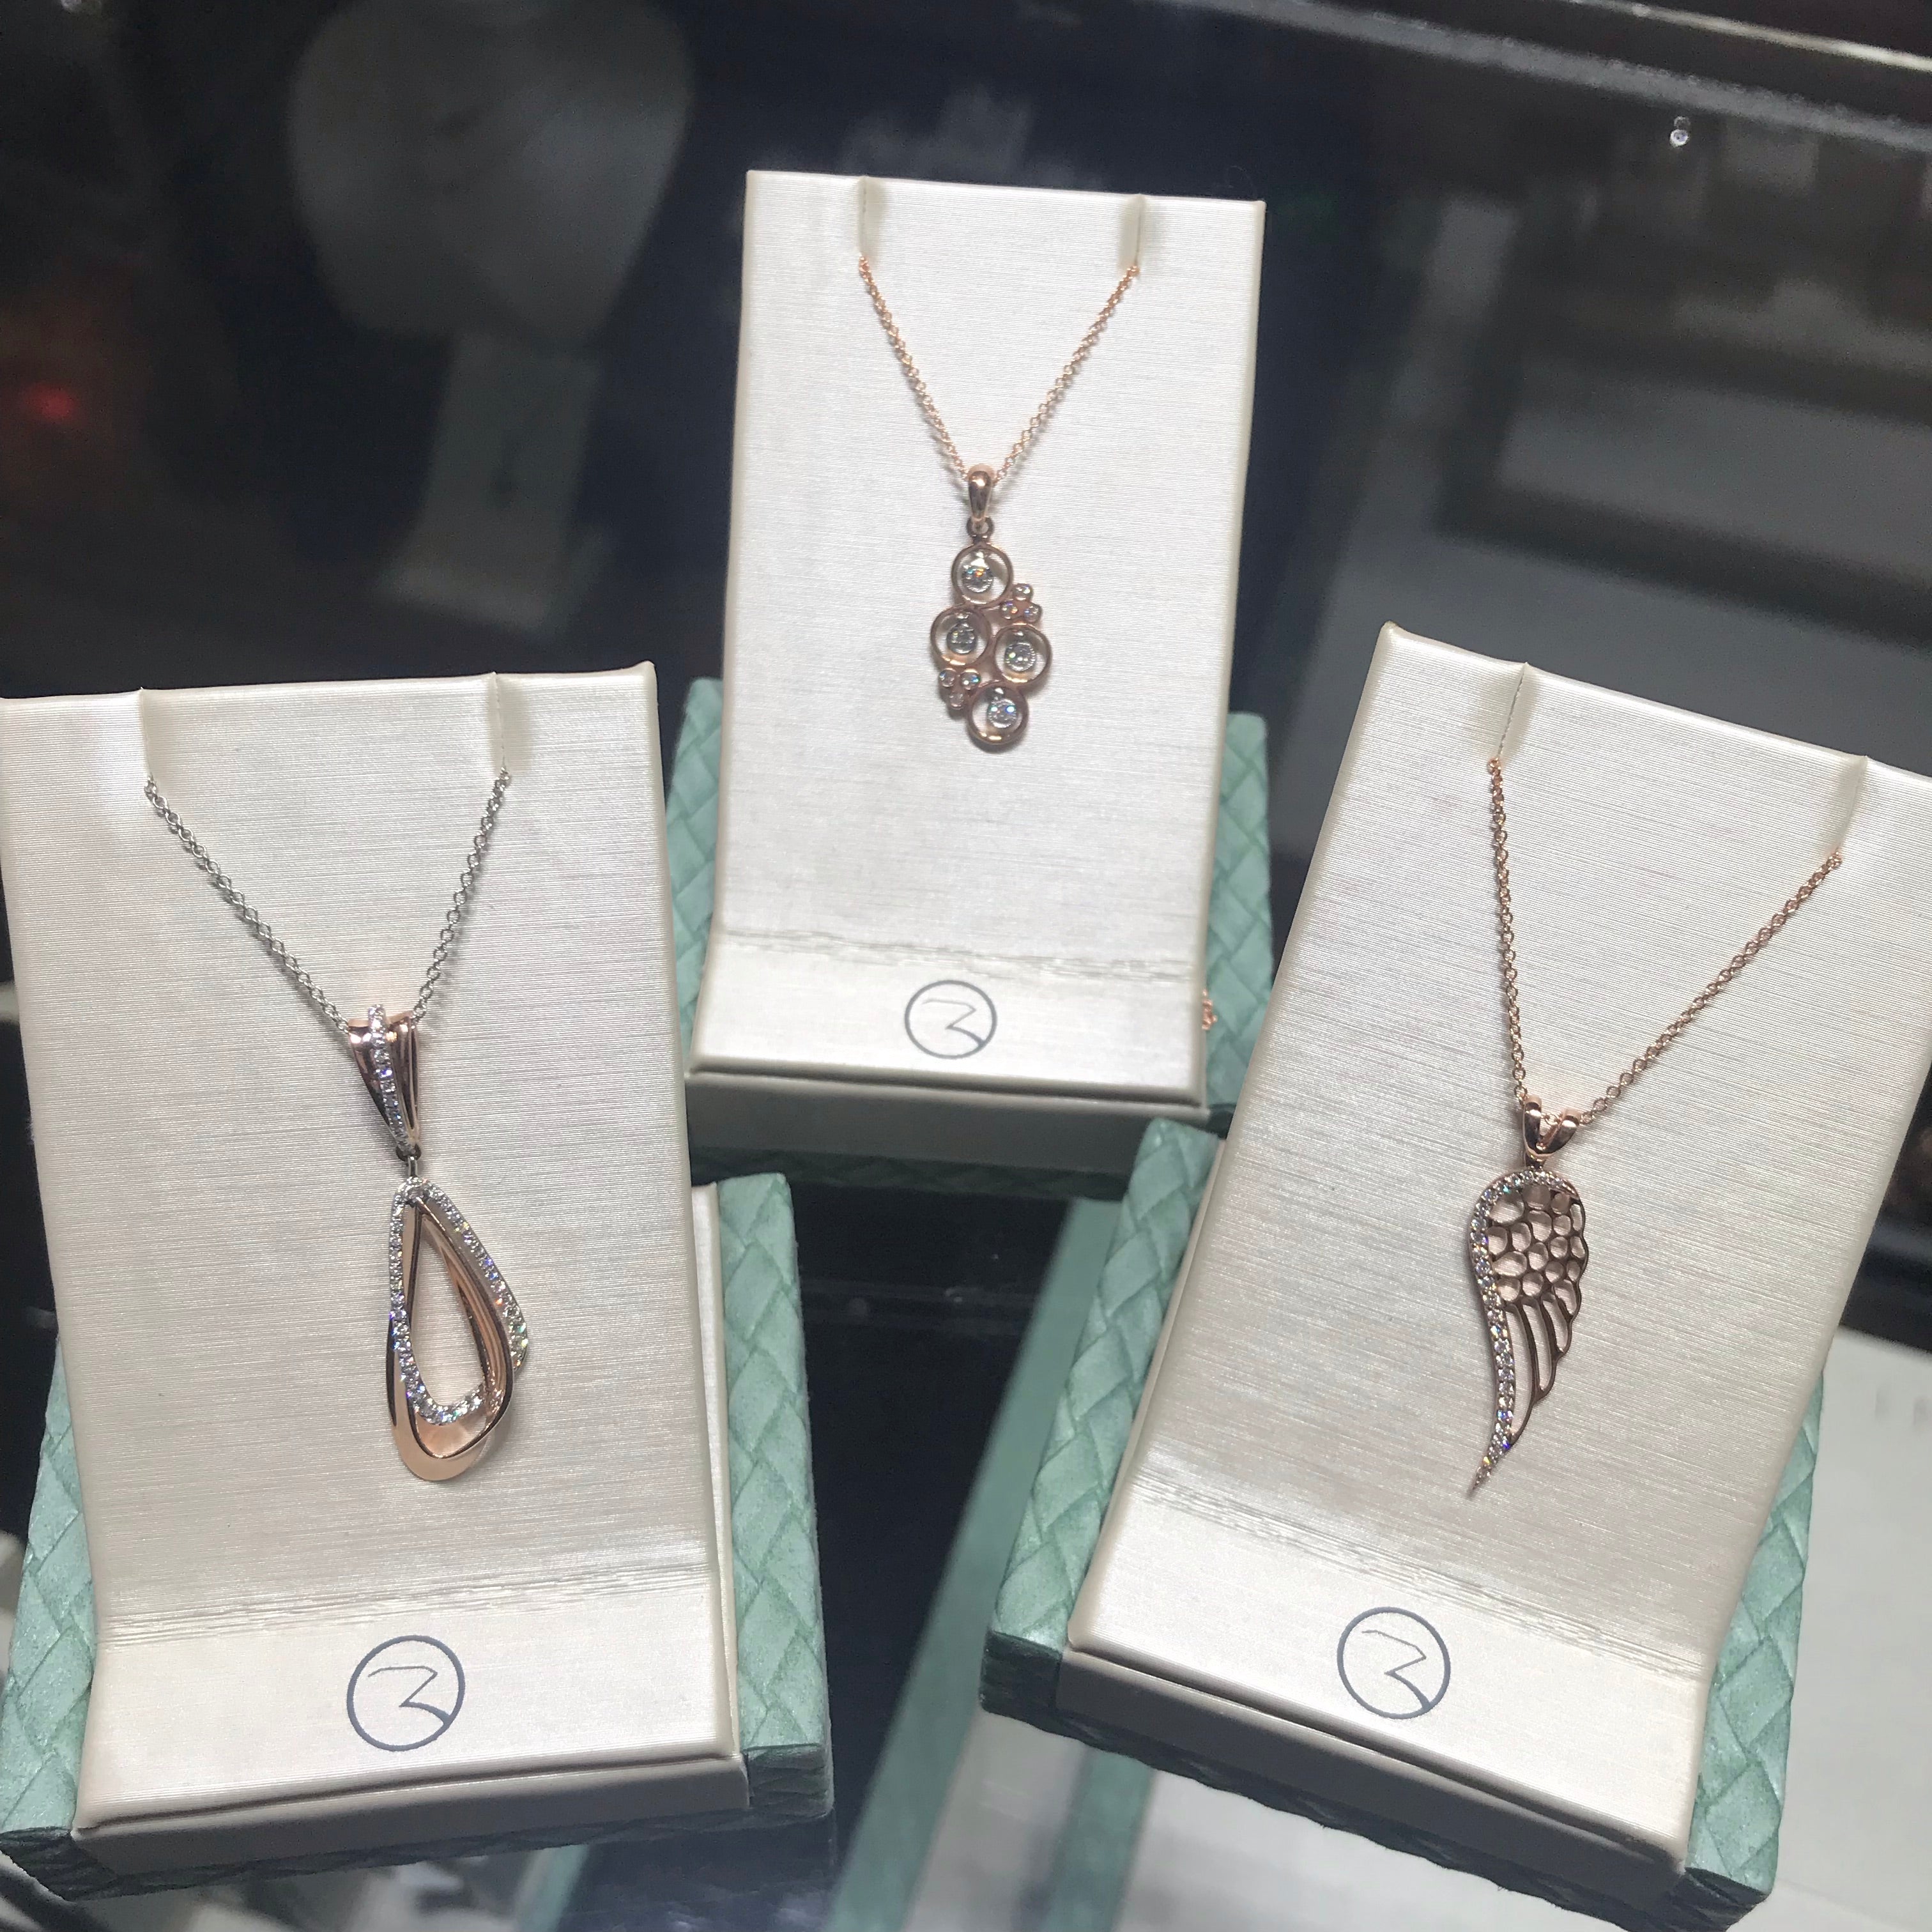 14k White and Rose Gold Diamond Necklaces